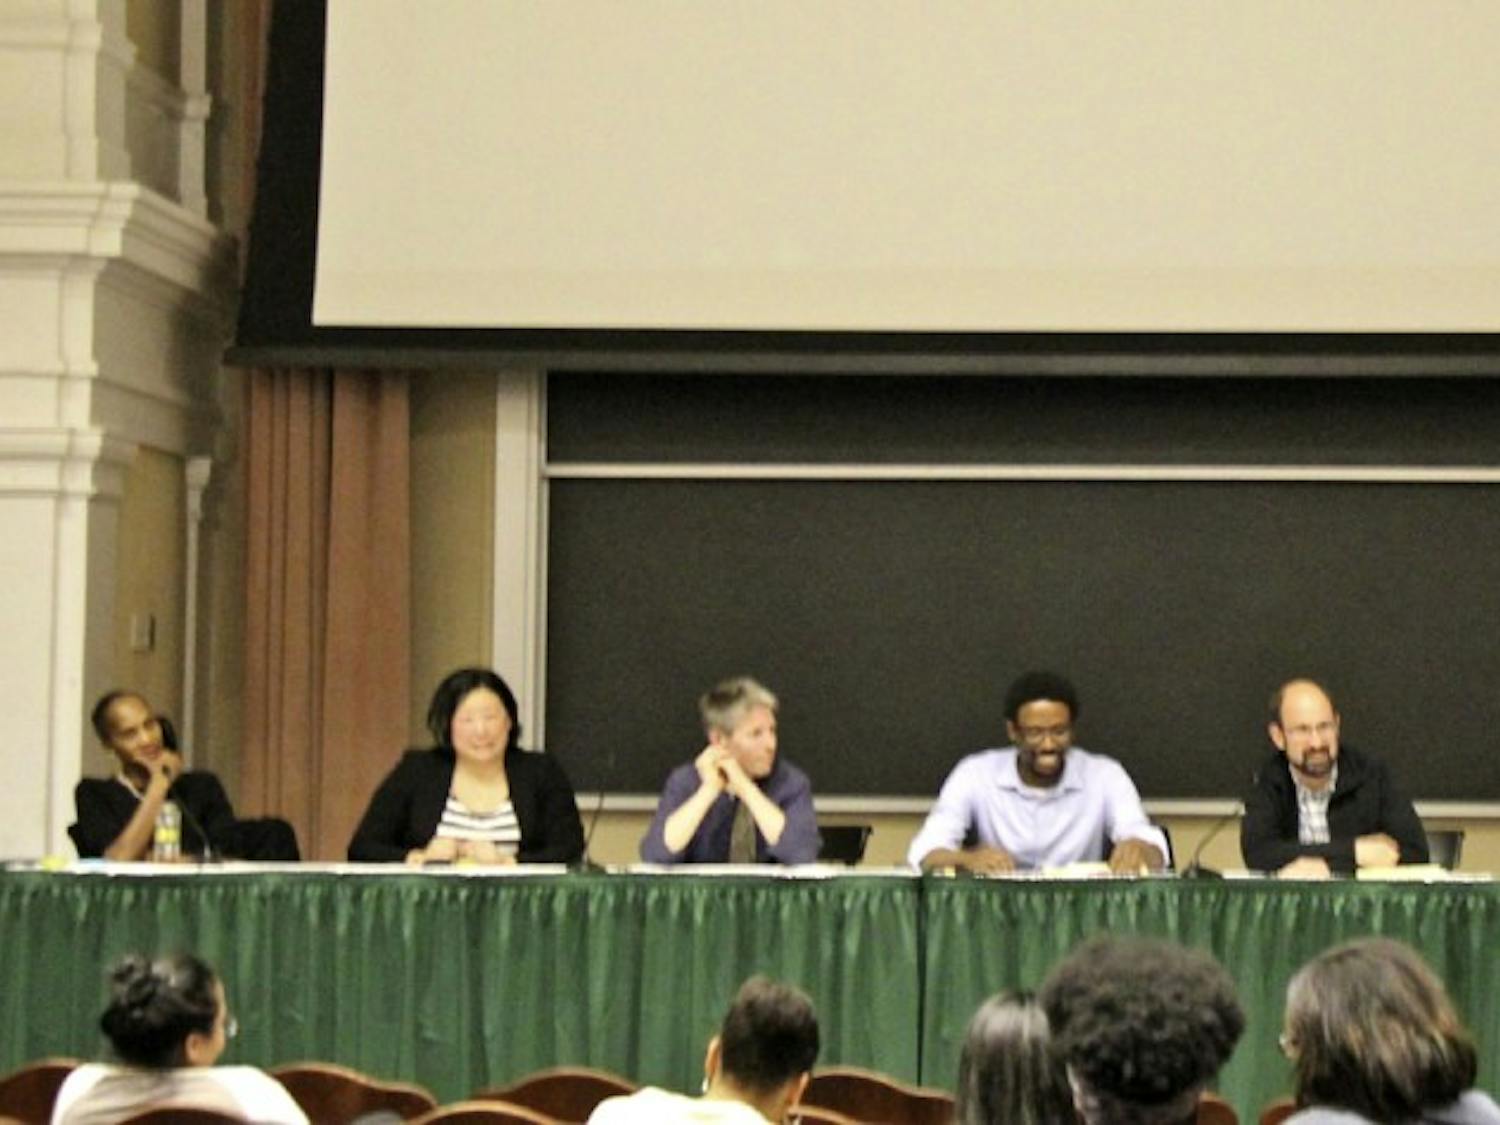 Dartmouth's chapter of the NAACP hosted a panel yesterday to discuss faculty diversity